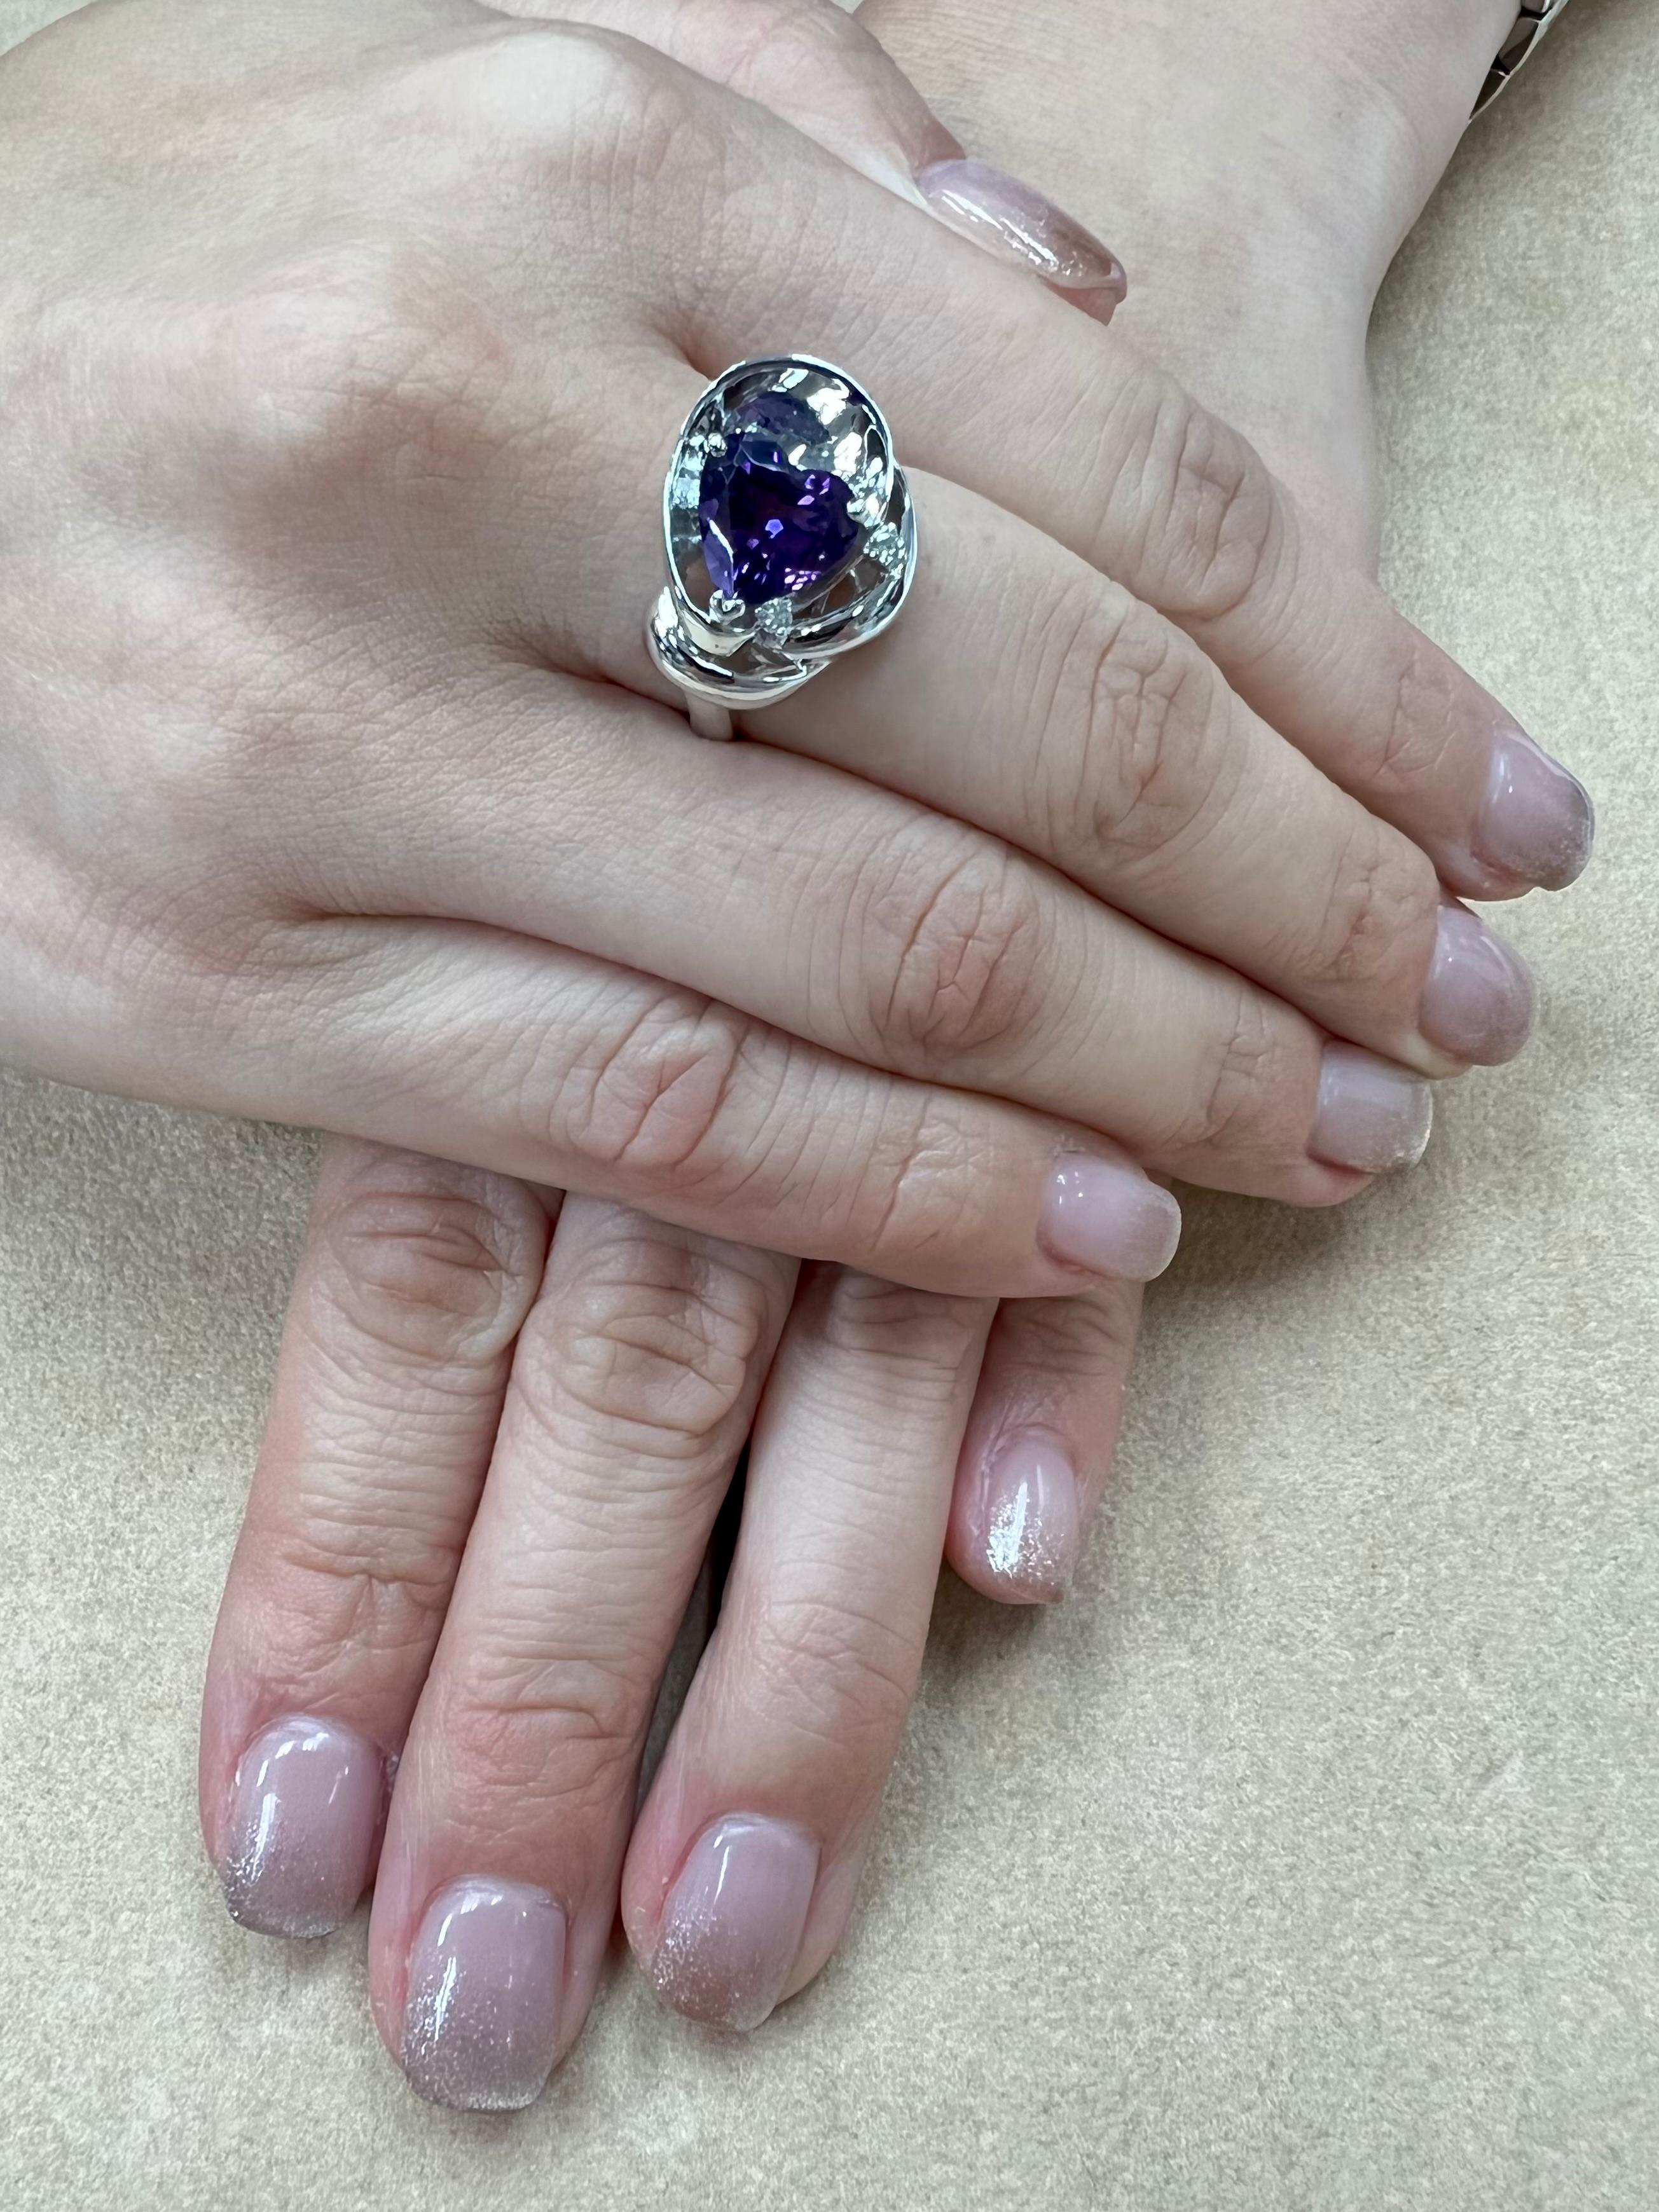 Please check out the HD video! Here is a nice Amethyst and diamond ring. It is set in 18k white gold and diamonds. The center heart cut amethyst (2.30 cts) is bright and full of life. This is a very clean stone with high transparency. All the photos